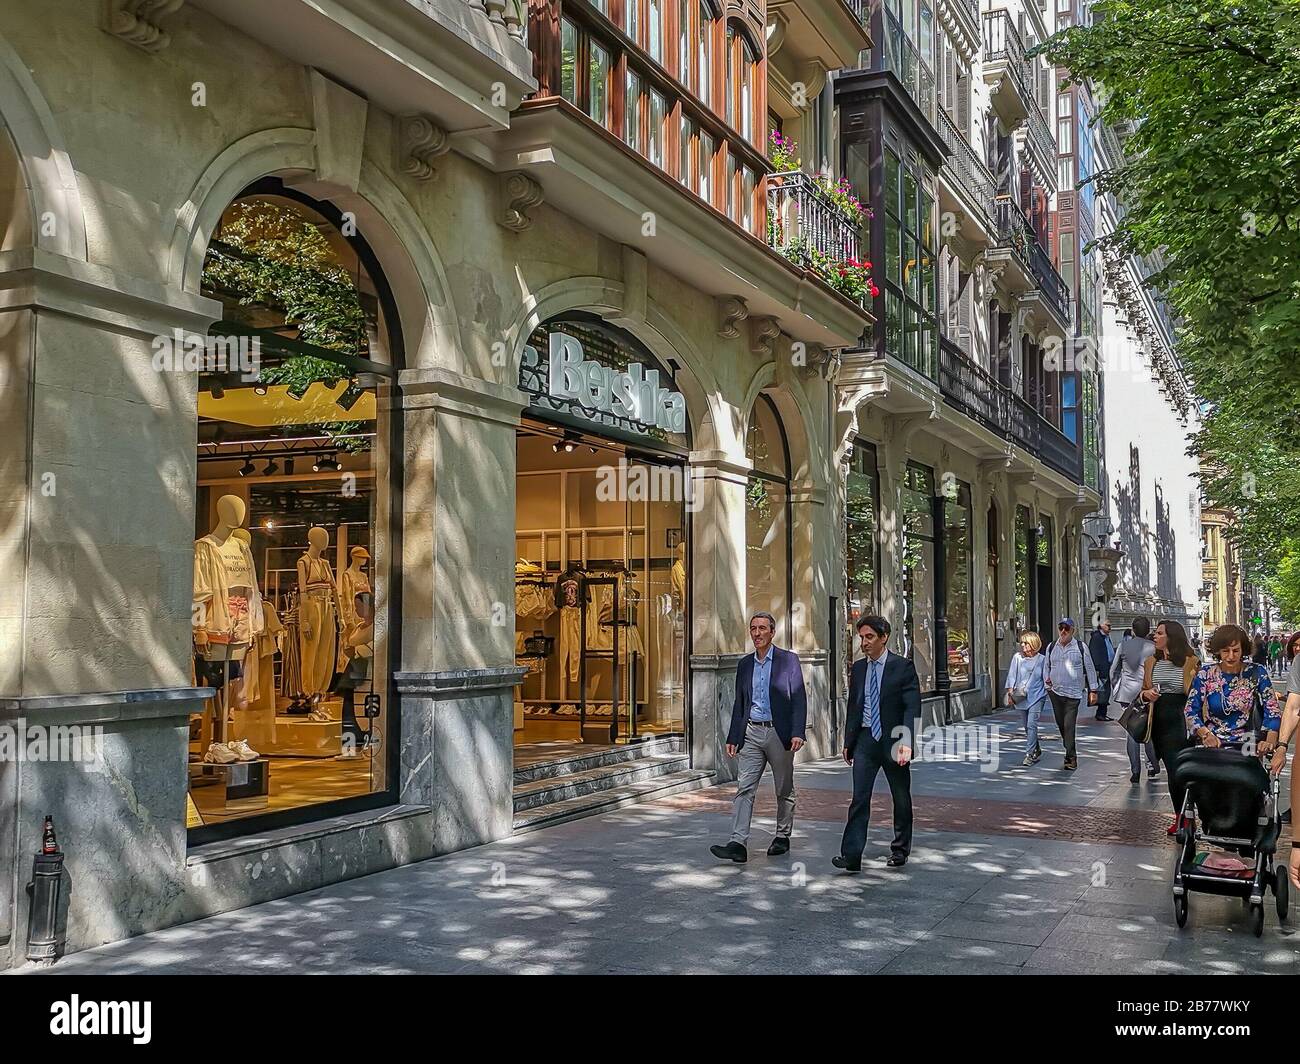 Bilbao, Biskaia, Spain - May 22, 2019: pedestrians on shopping tour in  front of the Bershka fashion shop Stock Photo - Alamy